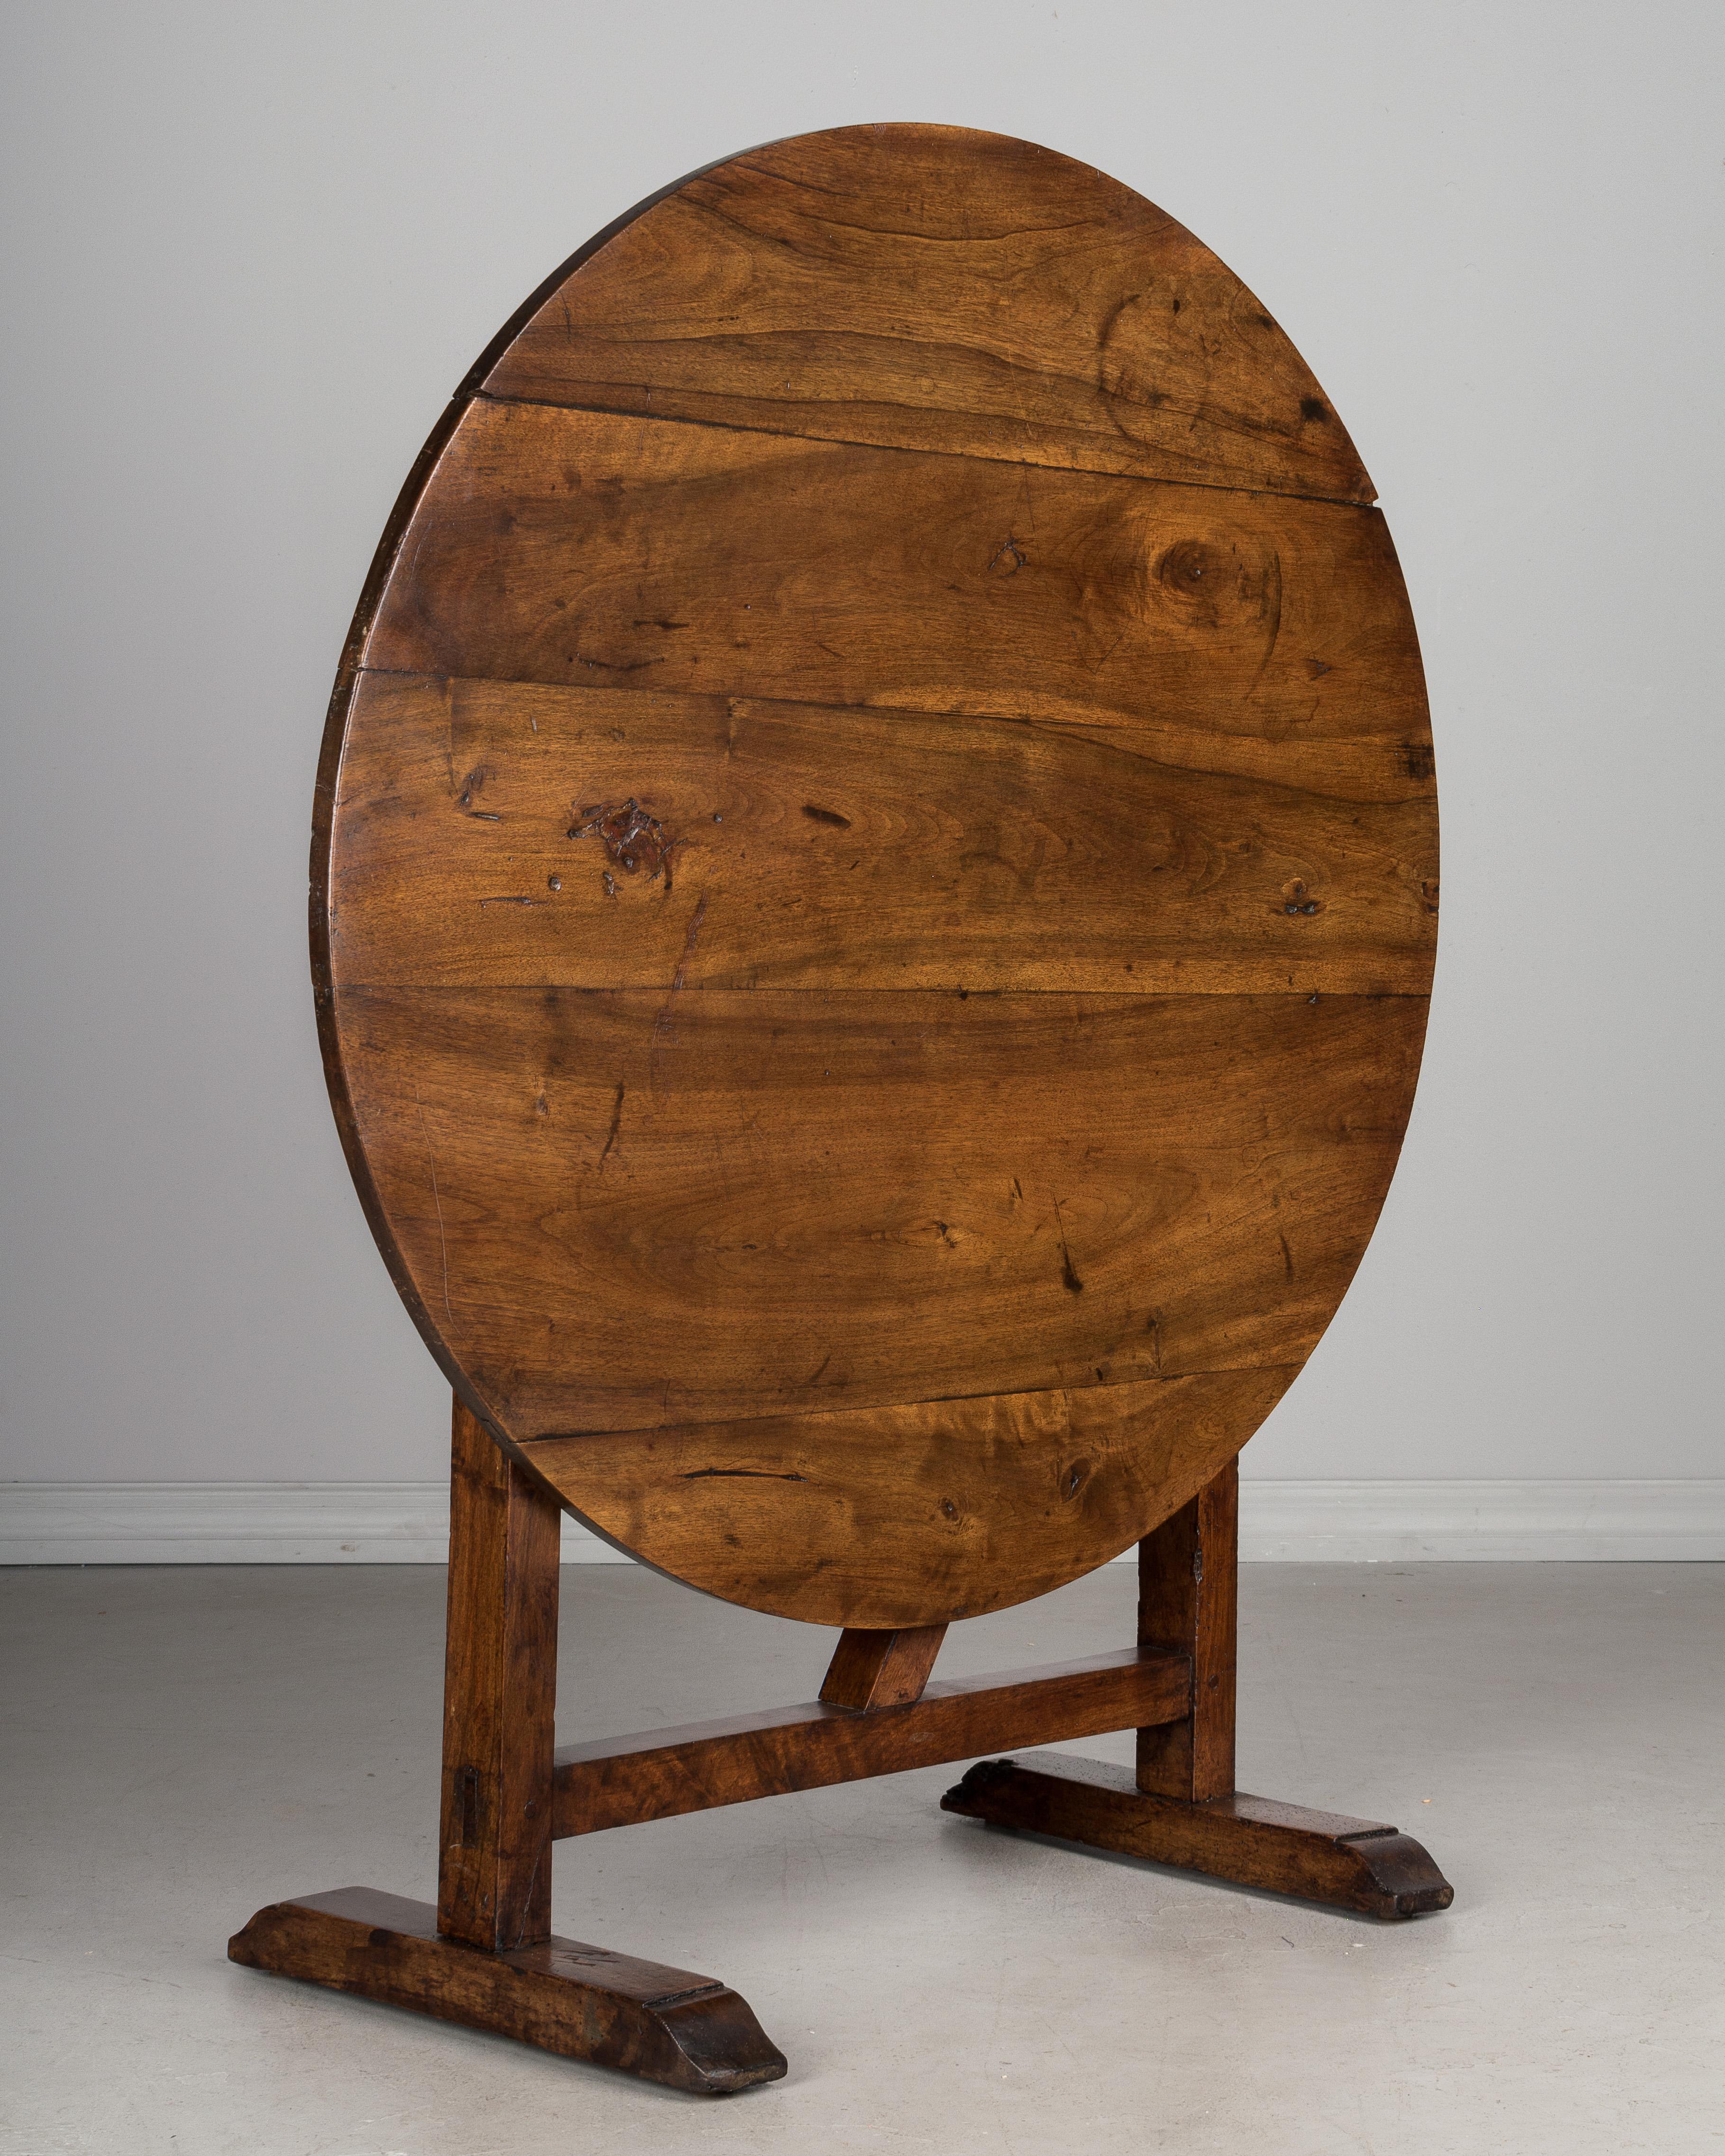 A French wine tasting, or tilt-top table, made of solid walnut with old waxed patina. Well-crafted with mortise and tenon joints and pegged construction. The frame has been restored and the table is good and sturdy.
When the table is tilted the